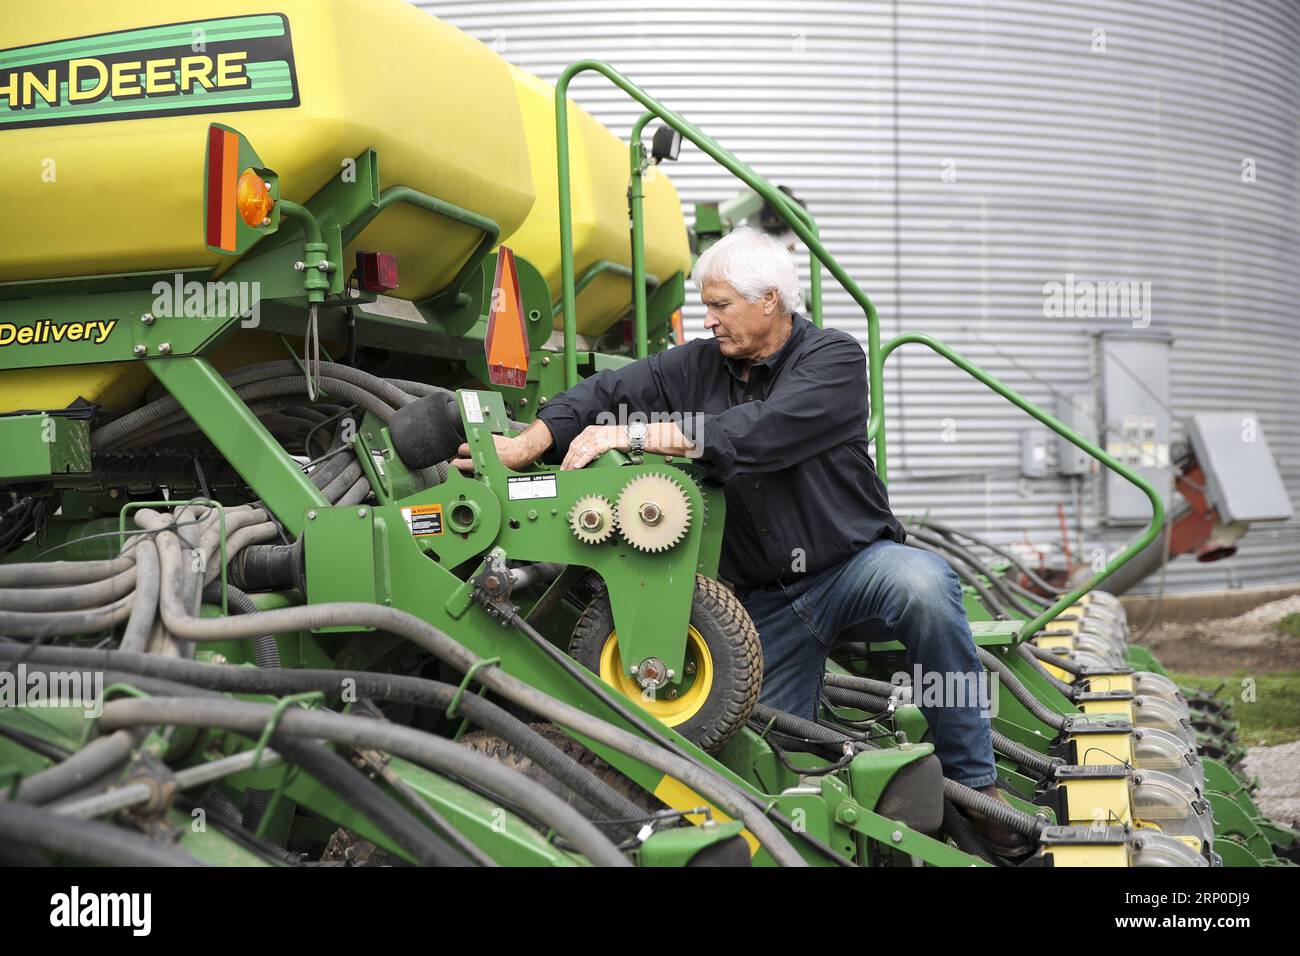 (180509) -- IOWA, May 9, 2018 -- Rick Kimberley checks a farming combine machine at his farm near Des Moines, capital of Iowa State, May 3, 2018. Rick and his son, Grant, grow more than 4,000 acres of corn and soybeans with a couple of hired hands and massive combines whose computers precisely track yield, moisture and other key statistics for each row and acre. He has been to China 15 times in recent years to talk about precision farming and other tricks of his trade, becoming an ambassador for modern farming methods in China. As for the current trade tensions between the United States and Ch Stock Photo